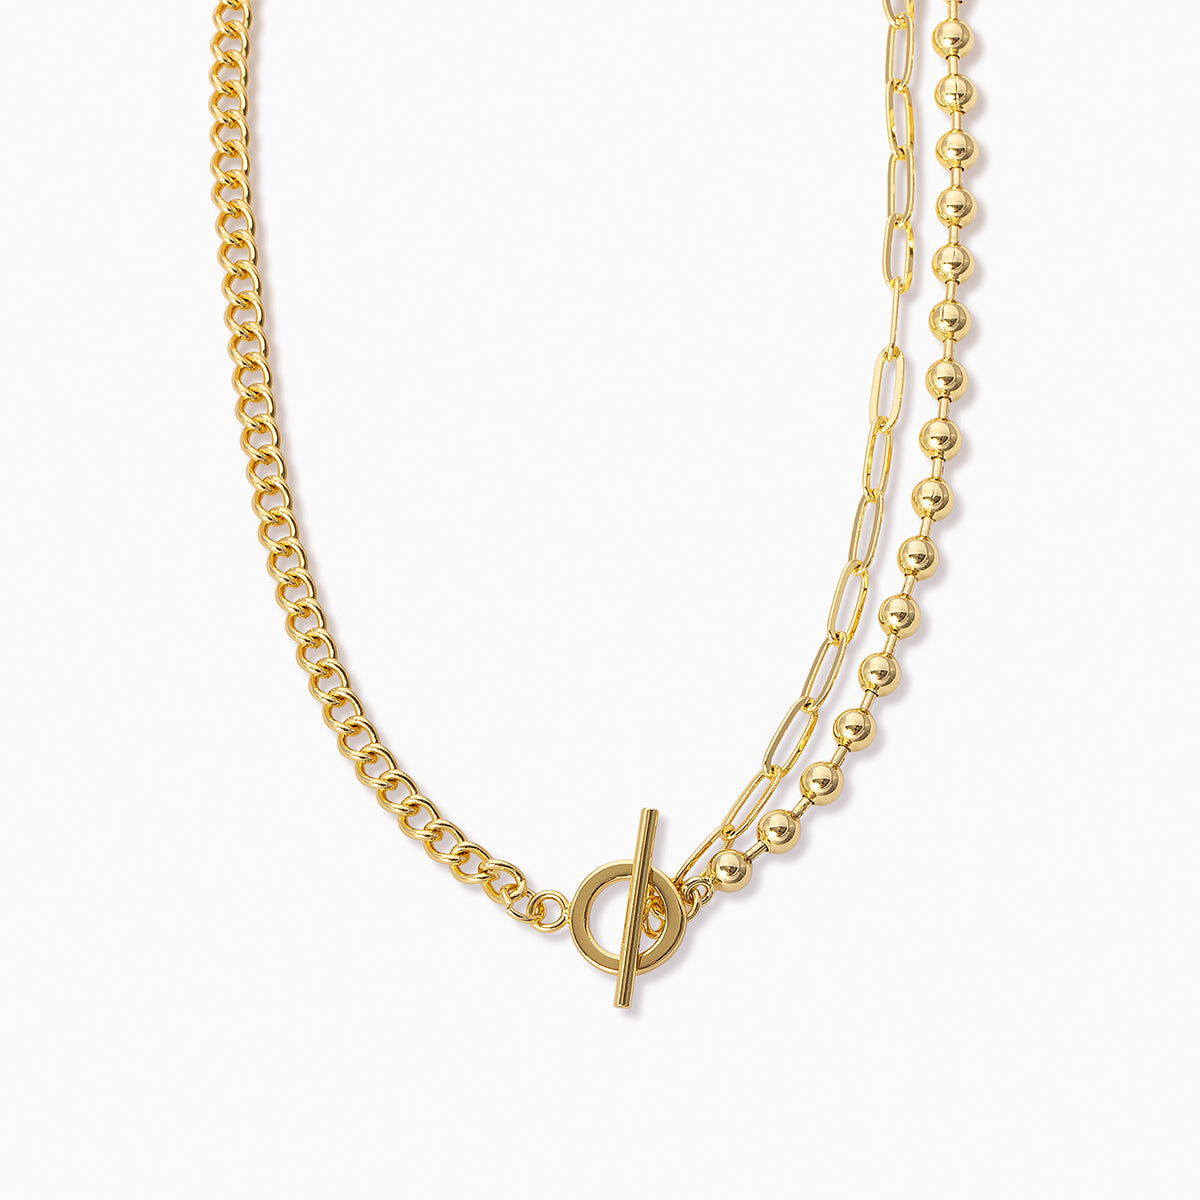 Three's a Party Chain Necklace | Gold | Product Image | Uncommon James